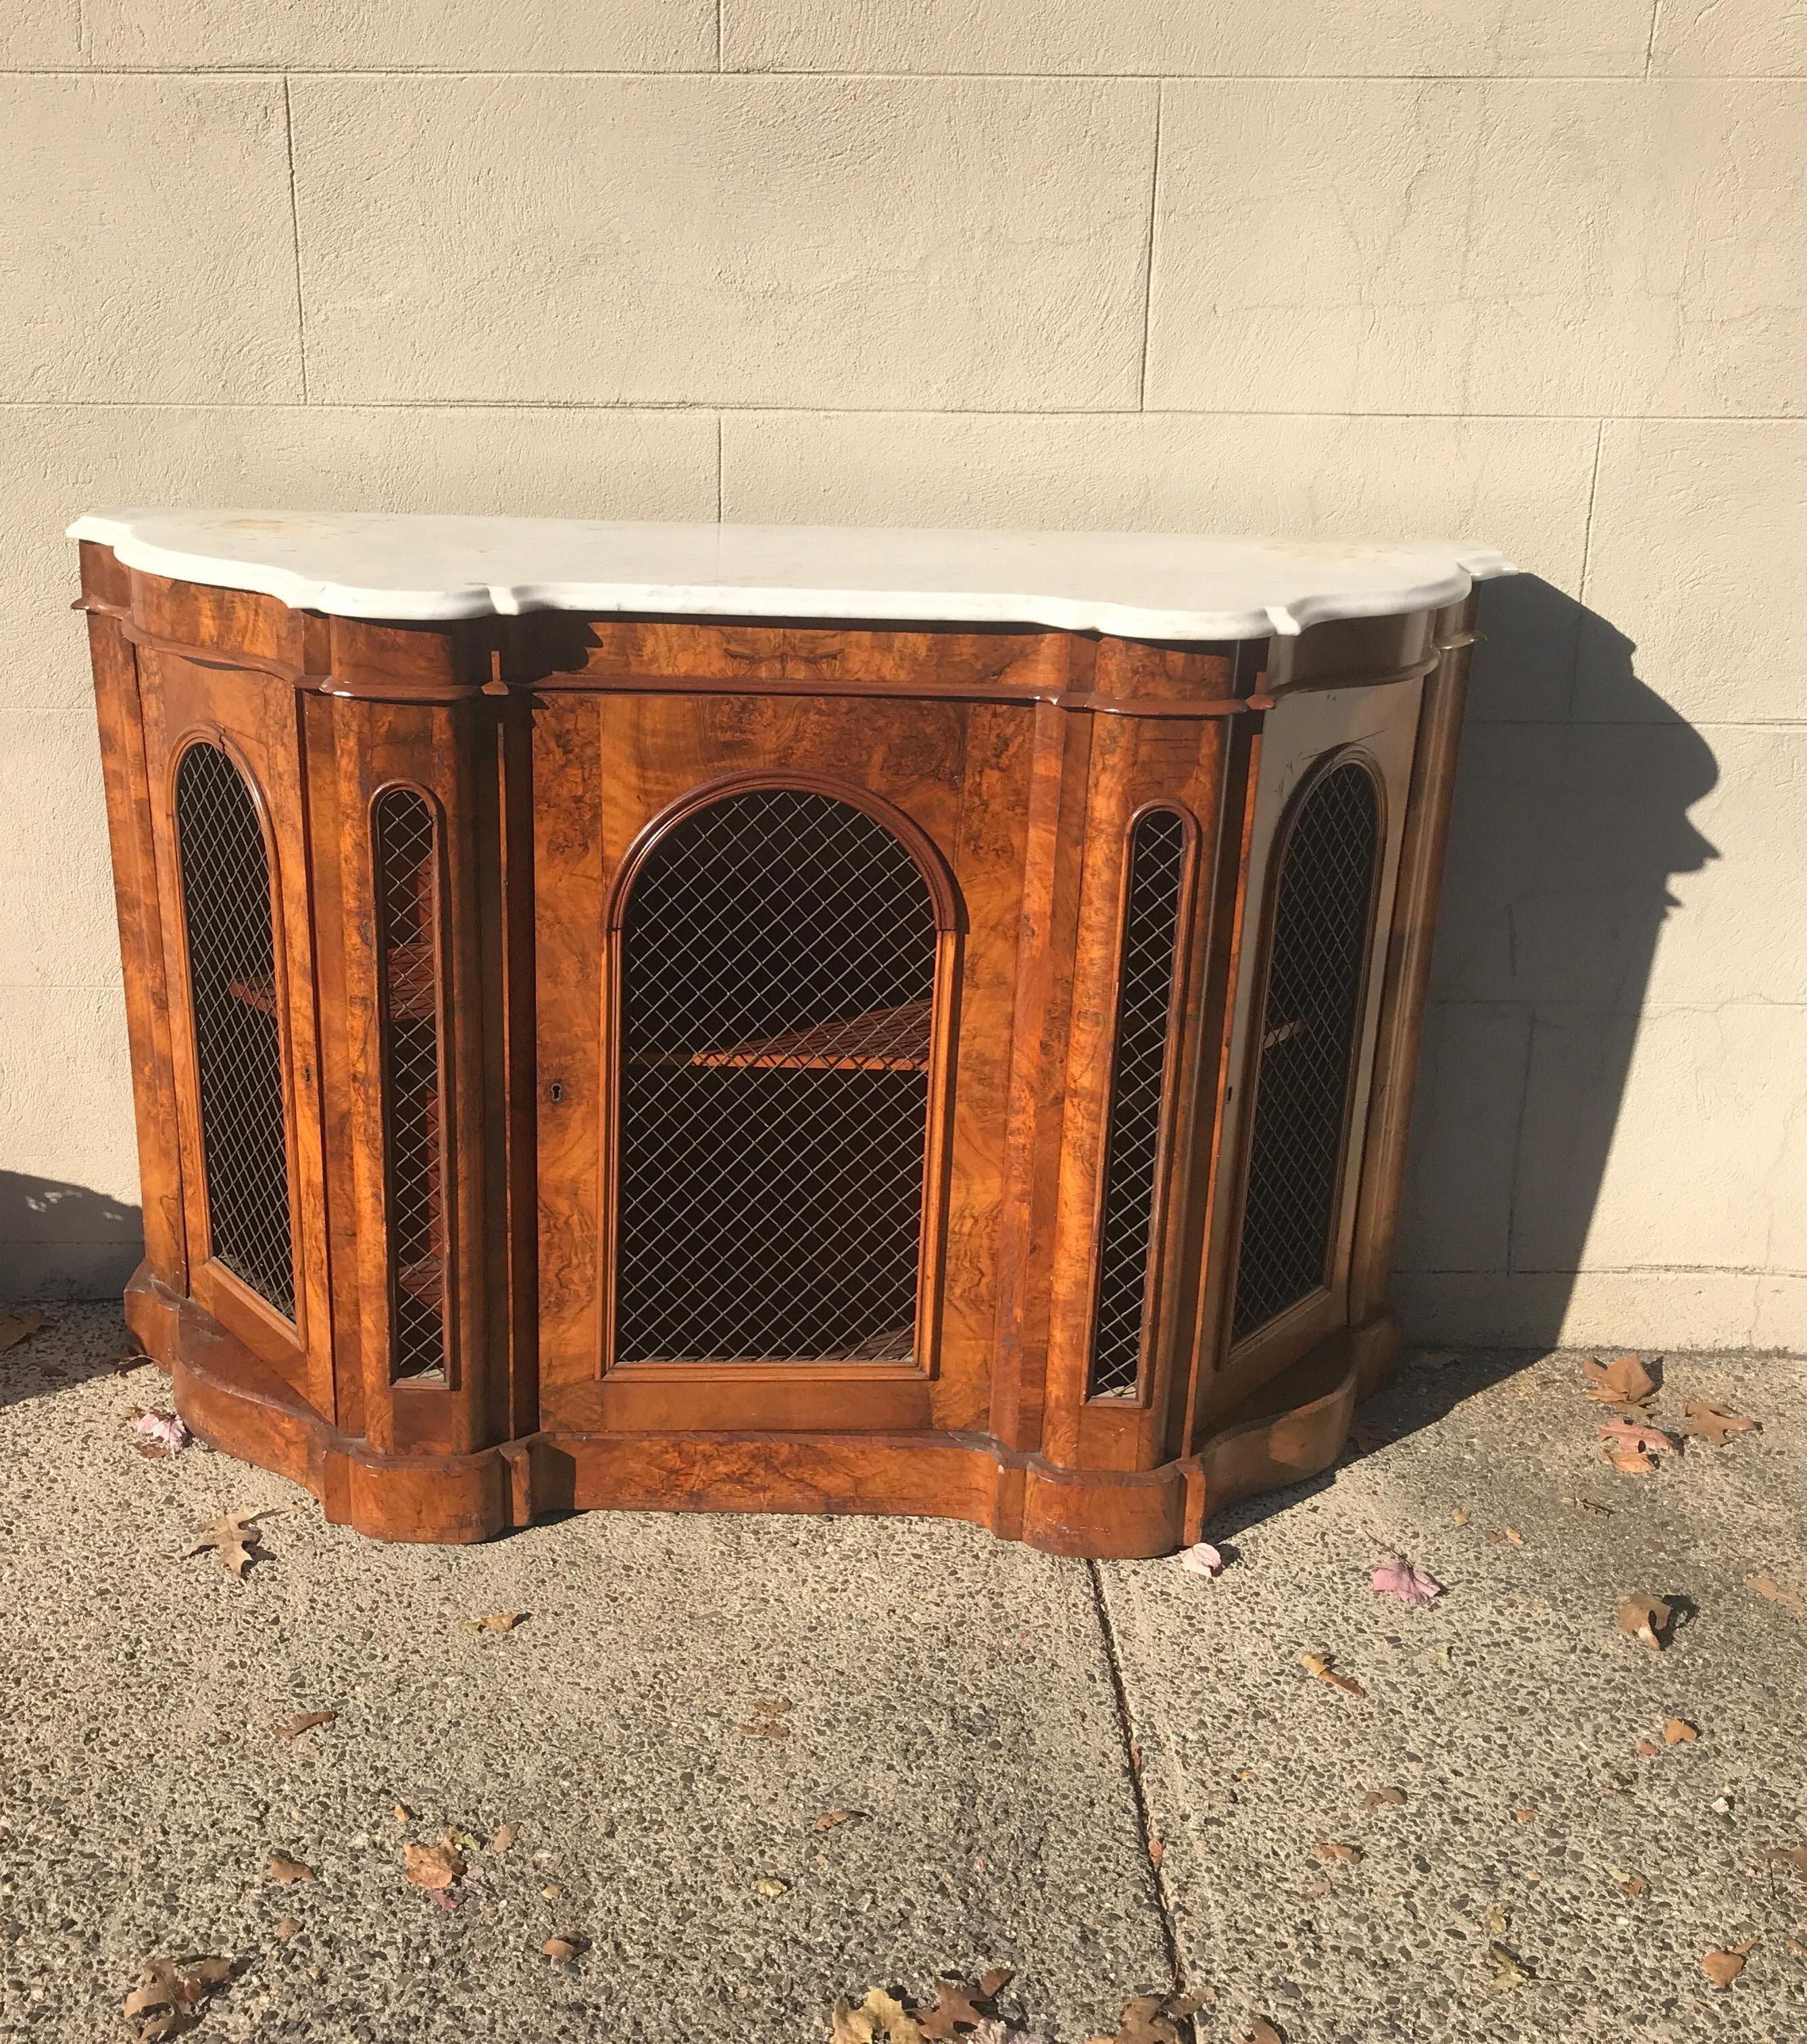 Beautiful Italian walnut credenza with original marble top. A center door flanked by a door on each side. The opening on the doors are covered by brass lattice grates. The interior with a single shelf. In very good original well cared for condition